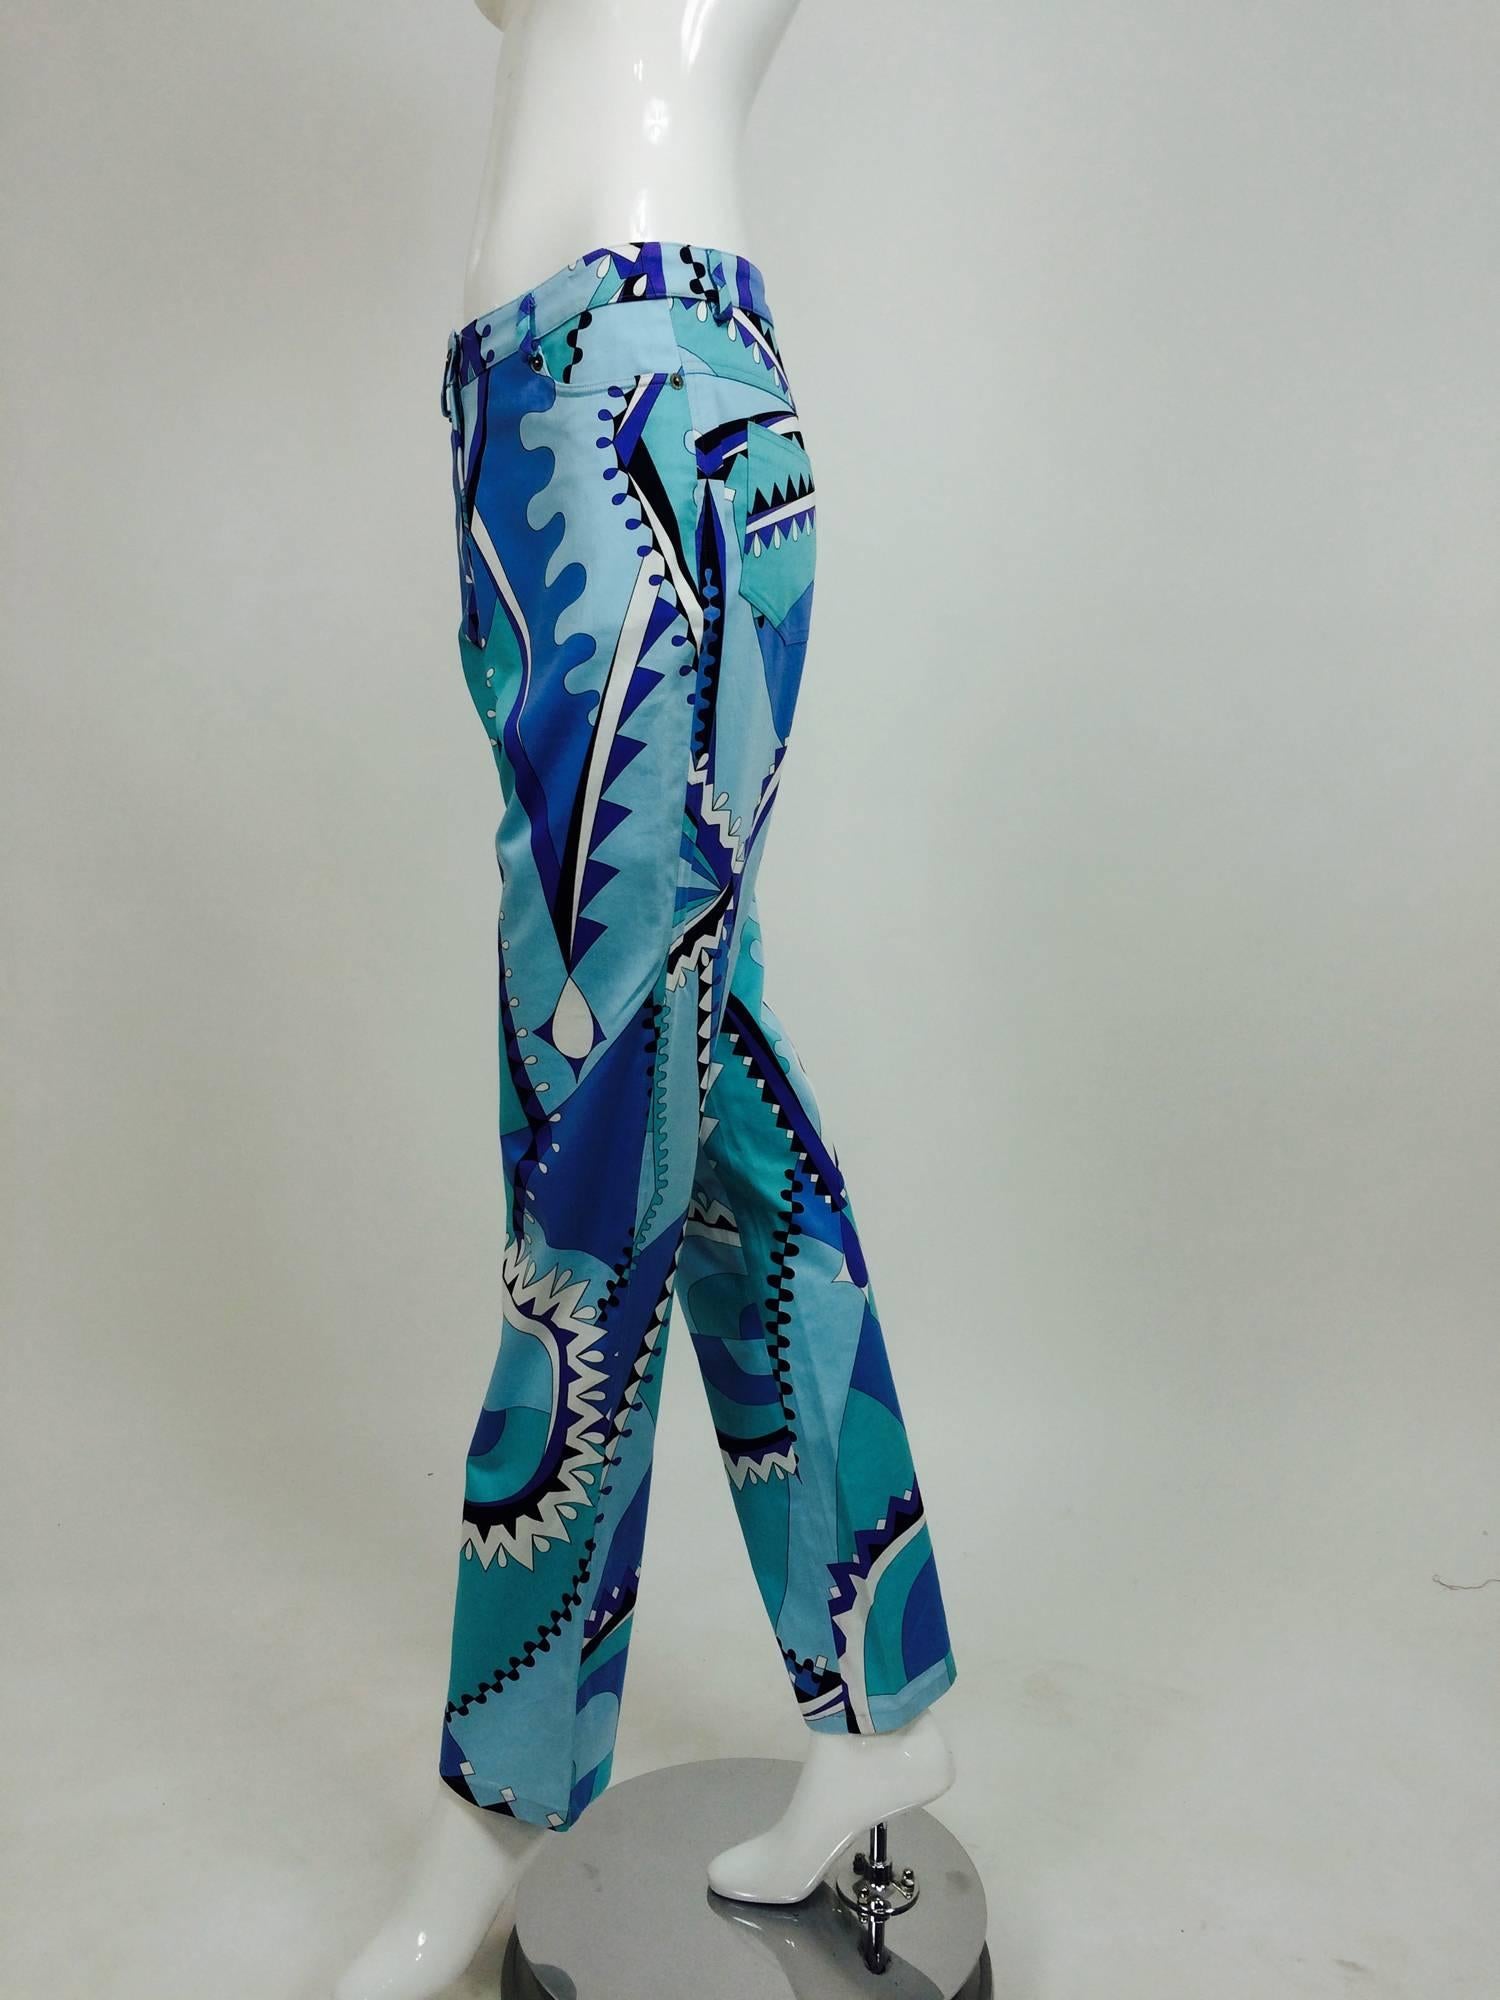 Bessi jean style trousers in vivid blues, aqua, purple, white and black...Geometric design...Slightly fared...Fly front...Unworn, new with tags...Marked size 8

In excellent wearable condition... All our clothing is dry cleaned and inspected for